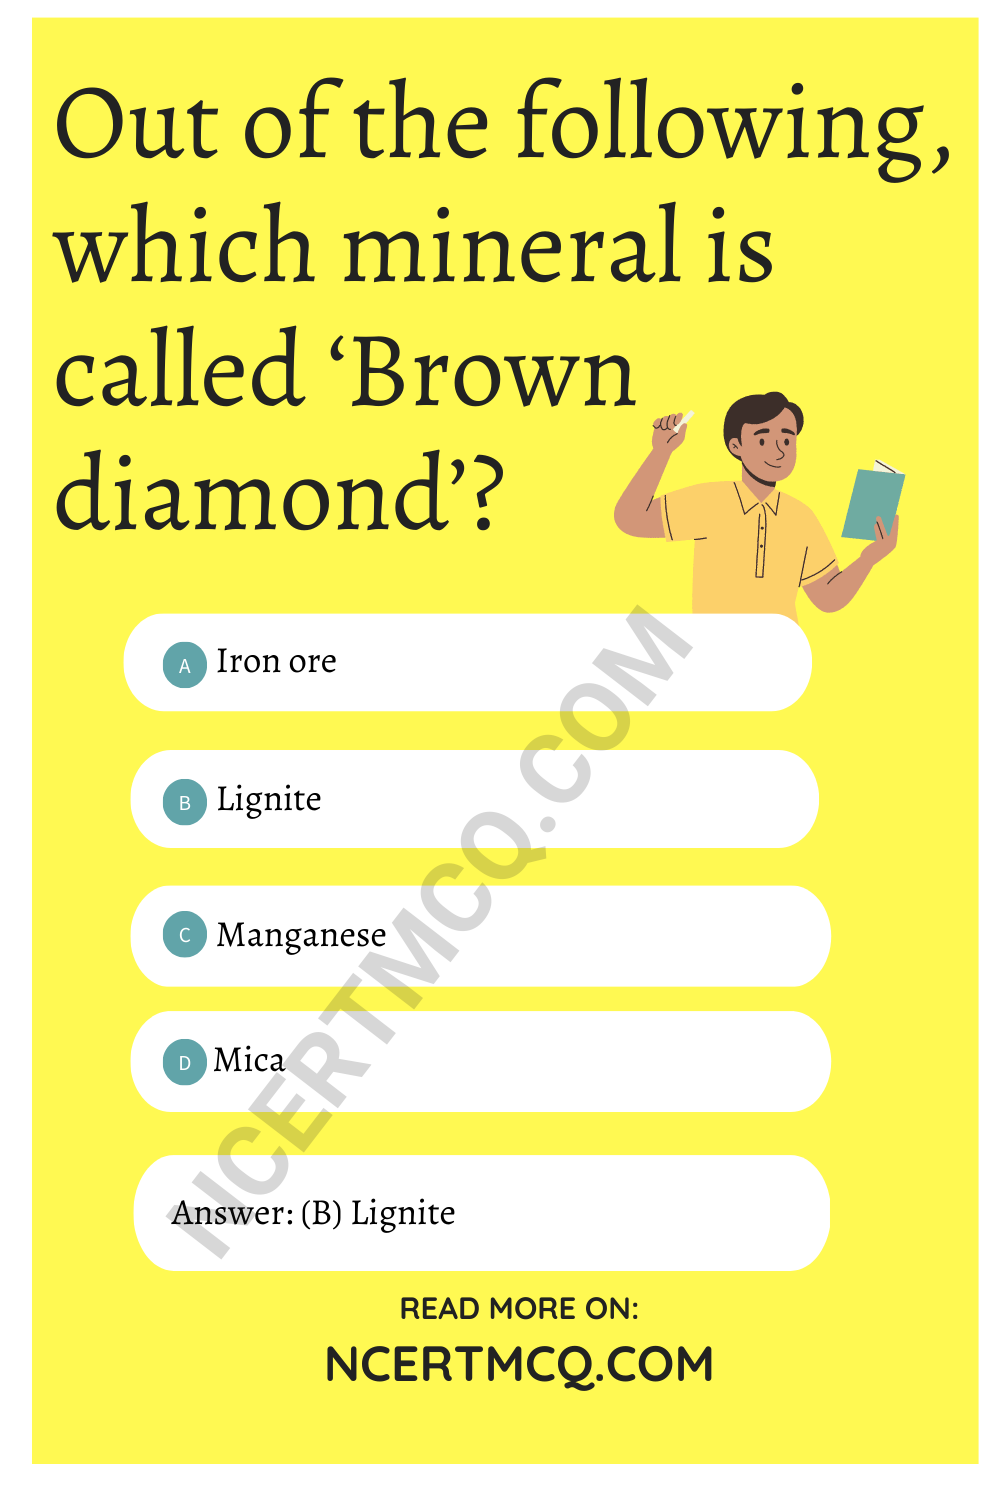 Out of the following, which mineral is called ‘Brown diamond’?